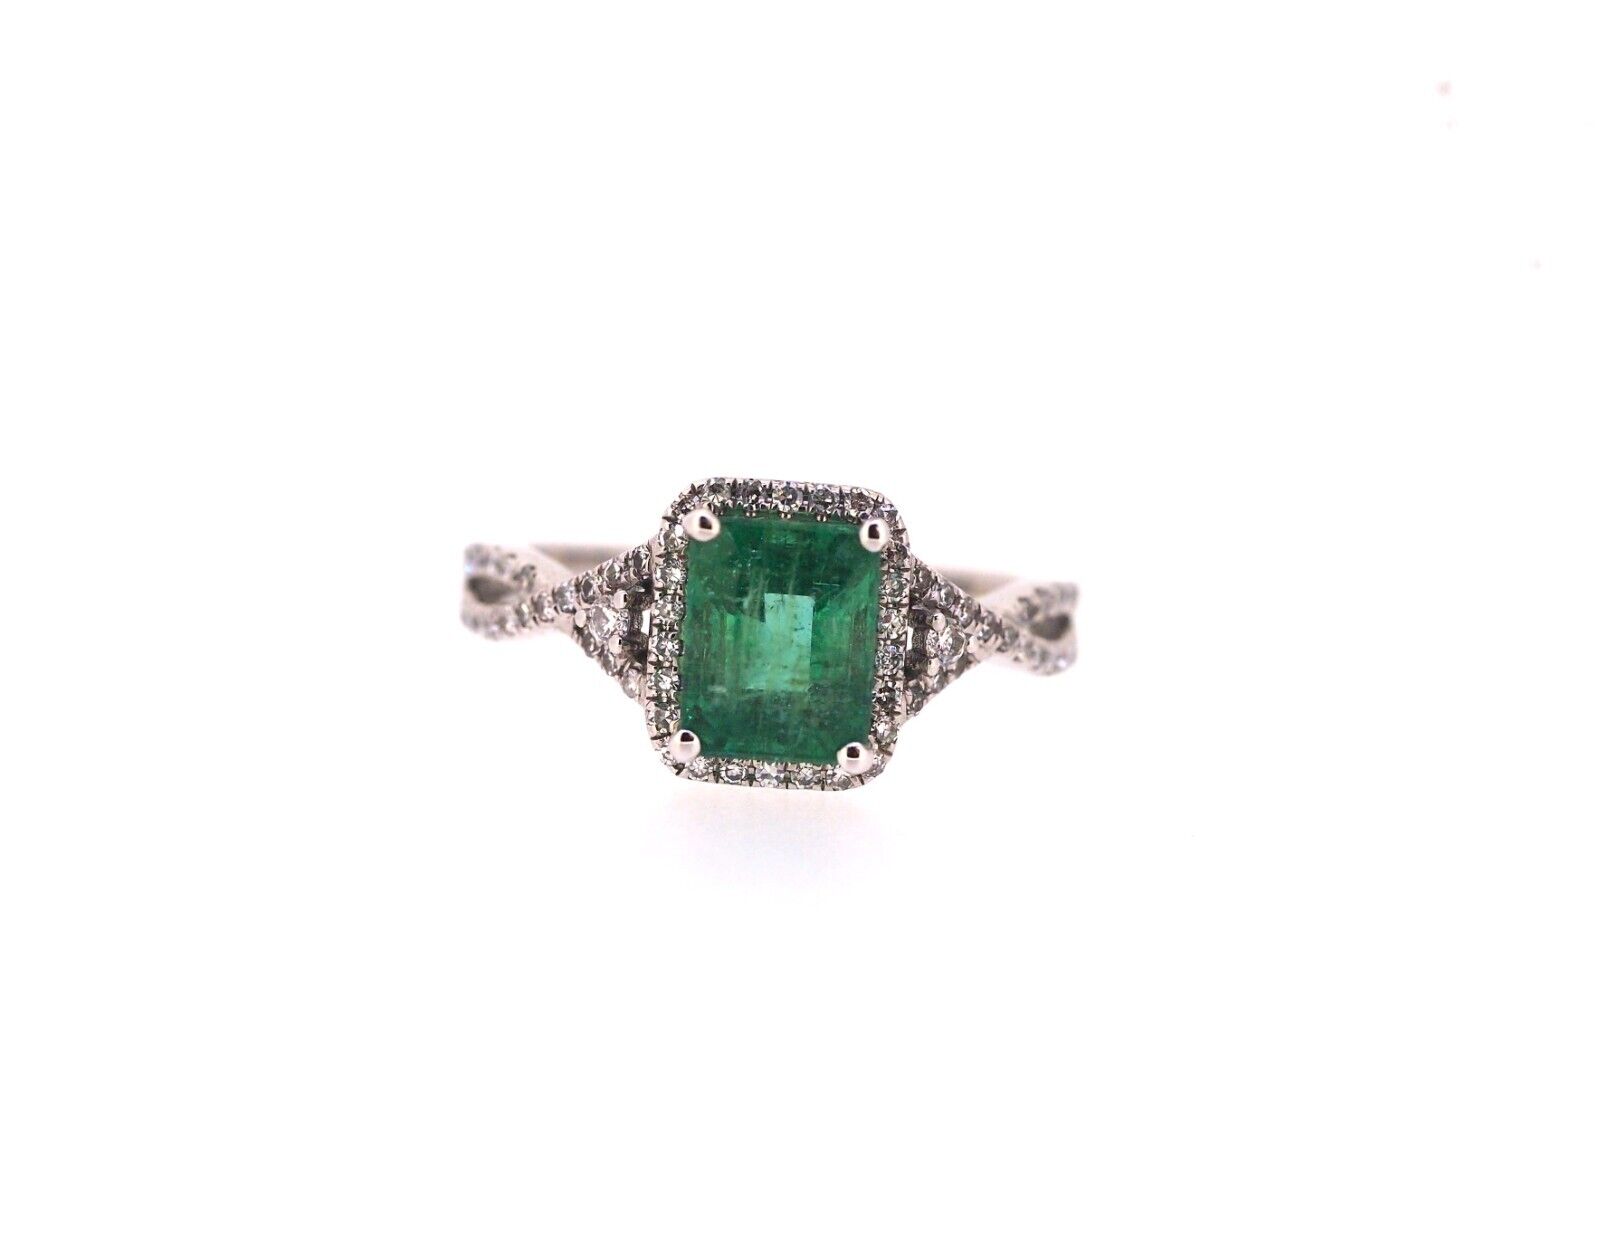 Certified 2.30 Total Carat Weight Natural Emerald and Diamonds 18K White Gold Ring - Image 4 of 7